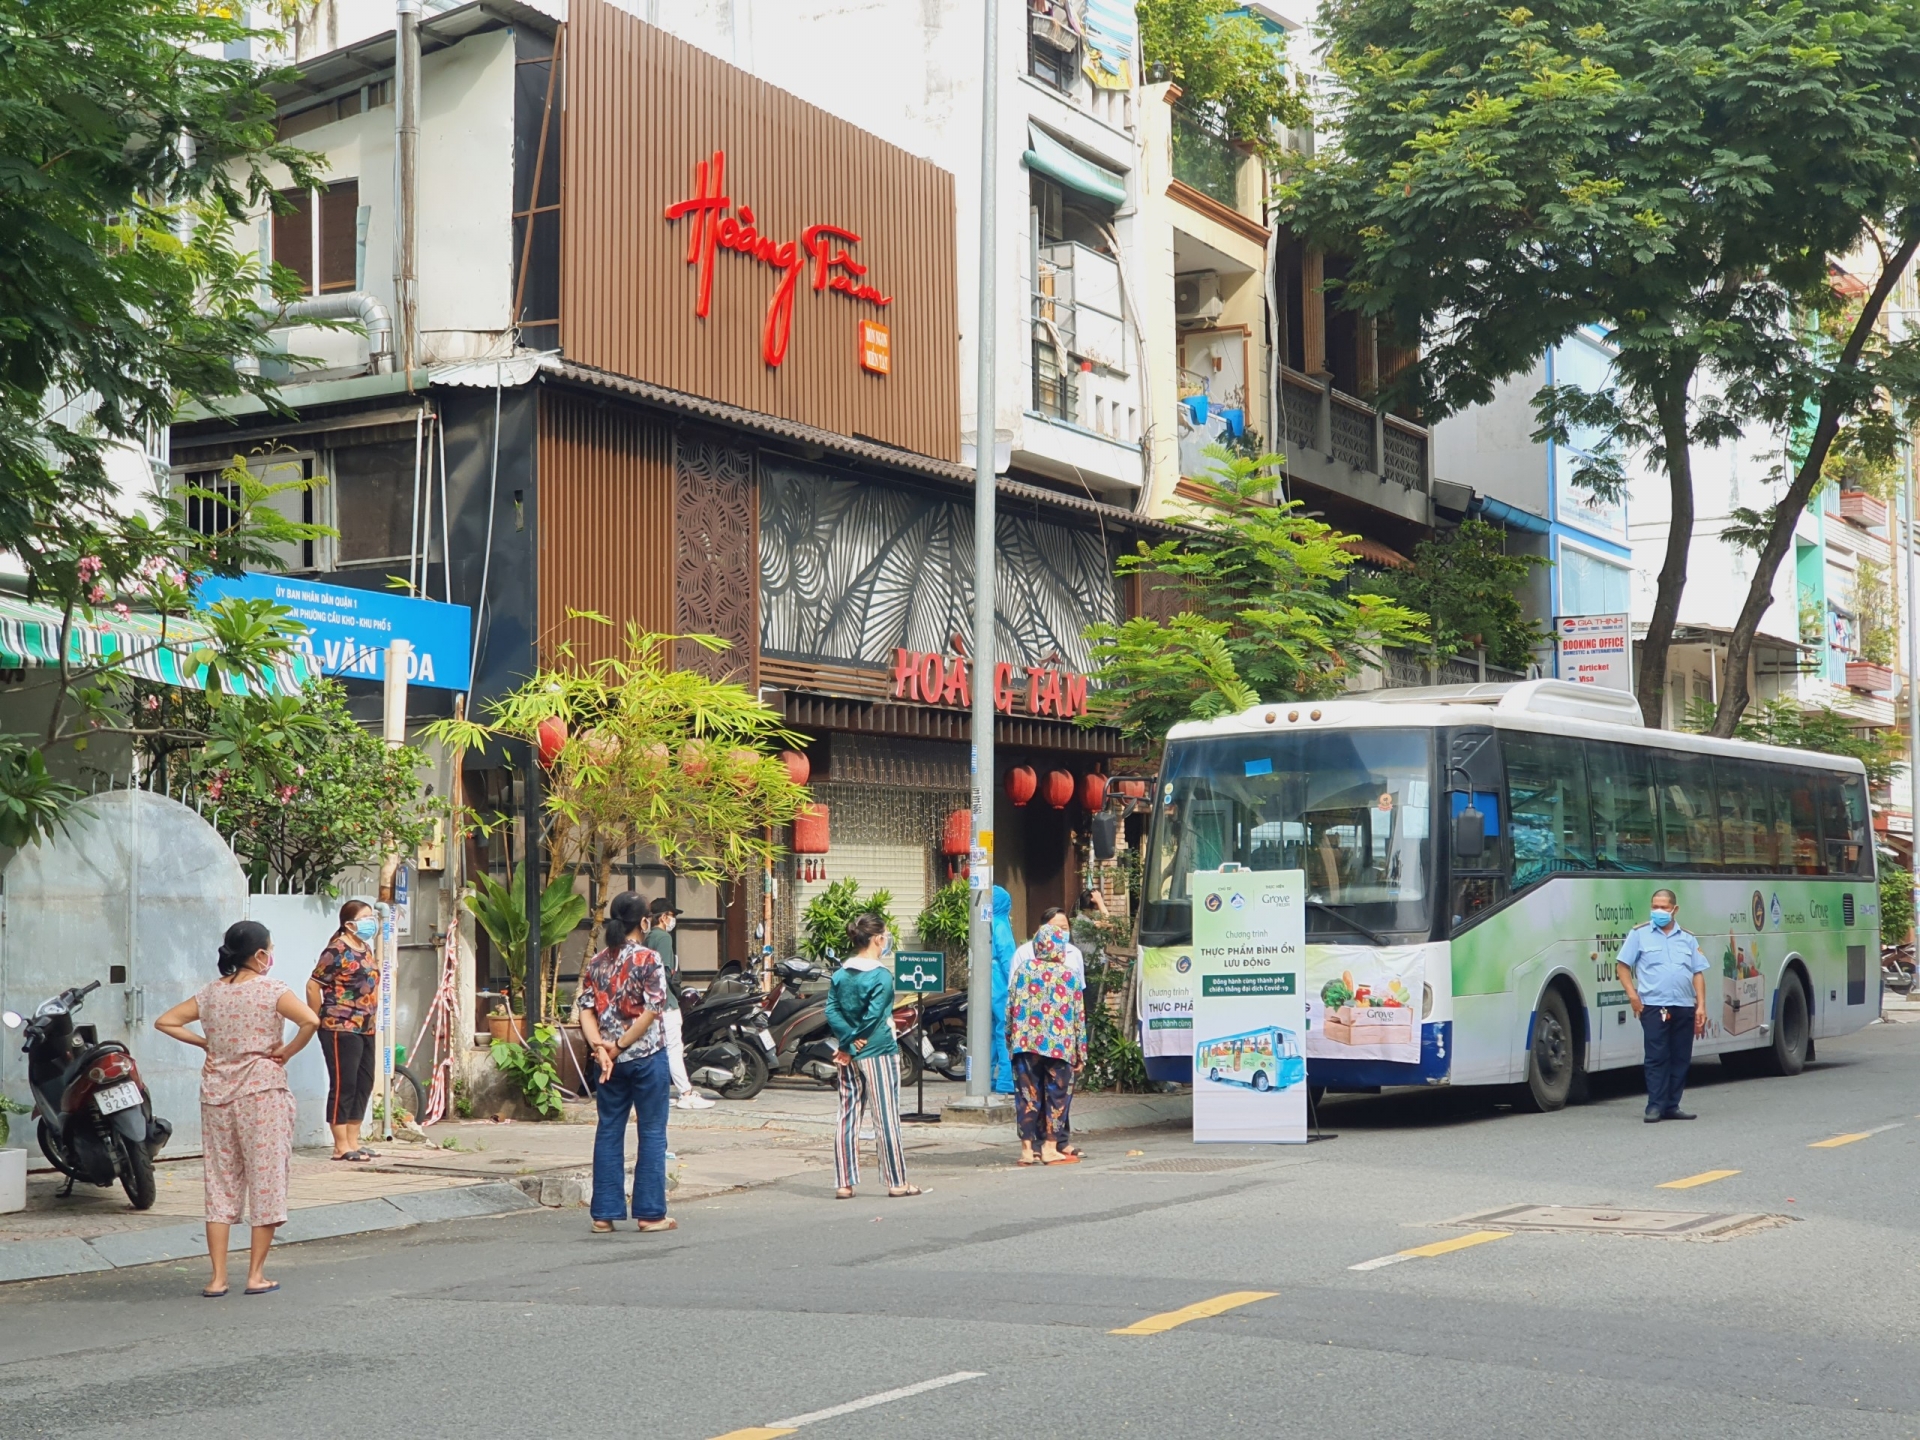 Bus converted to mini-supermarket to sell food in Ho Chi Minh City